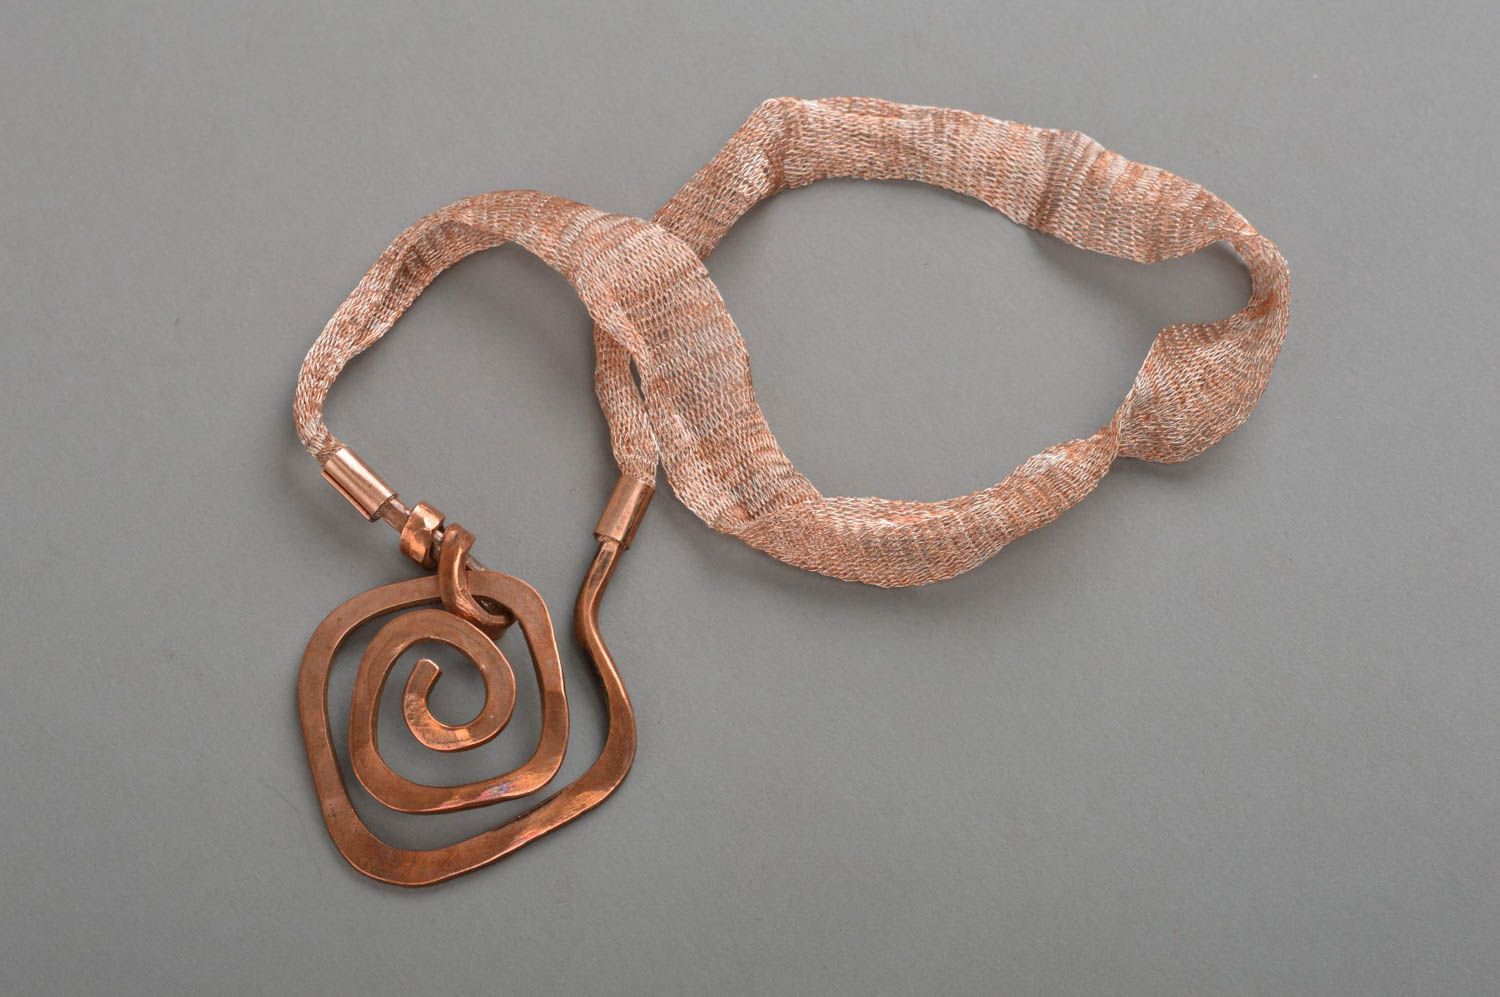 Handmade unusual accessory designer forged pendant on lace made of copper photo 2